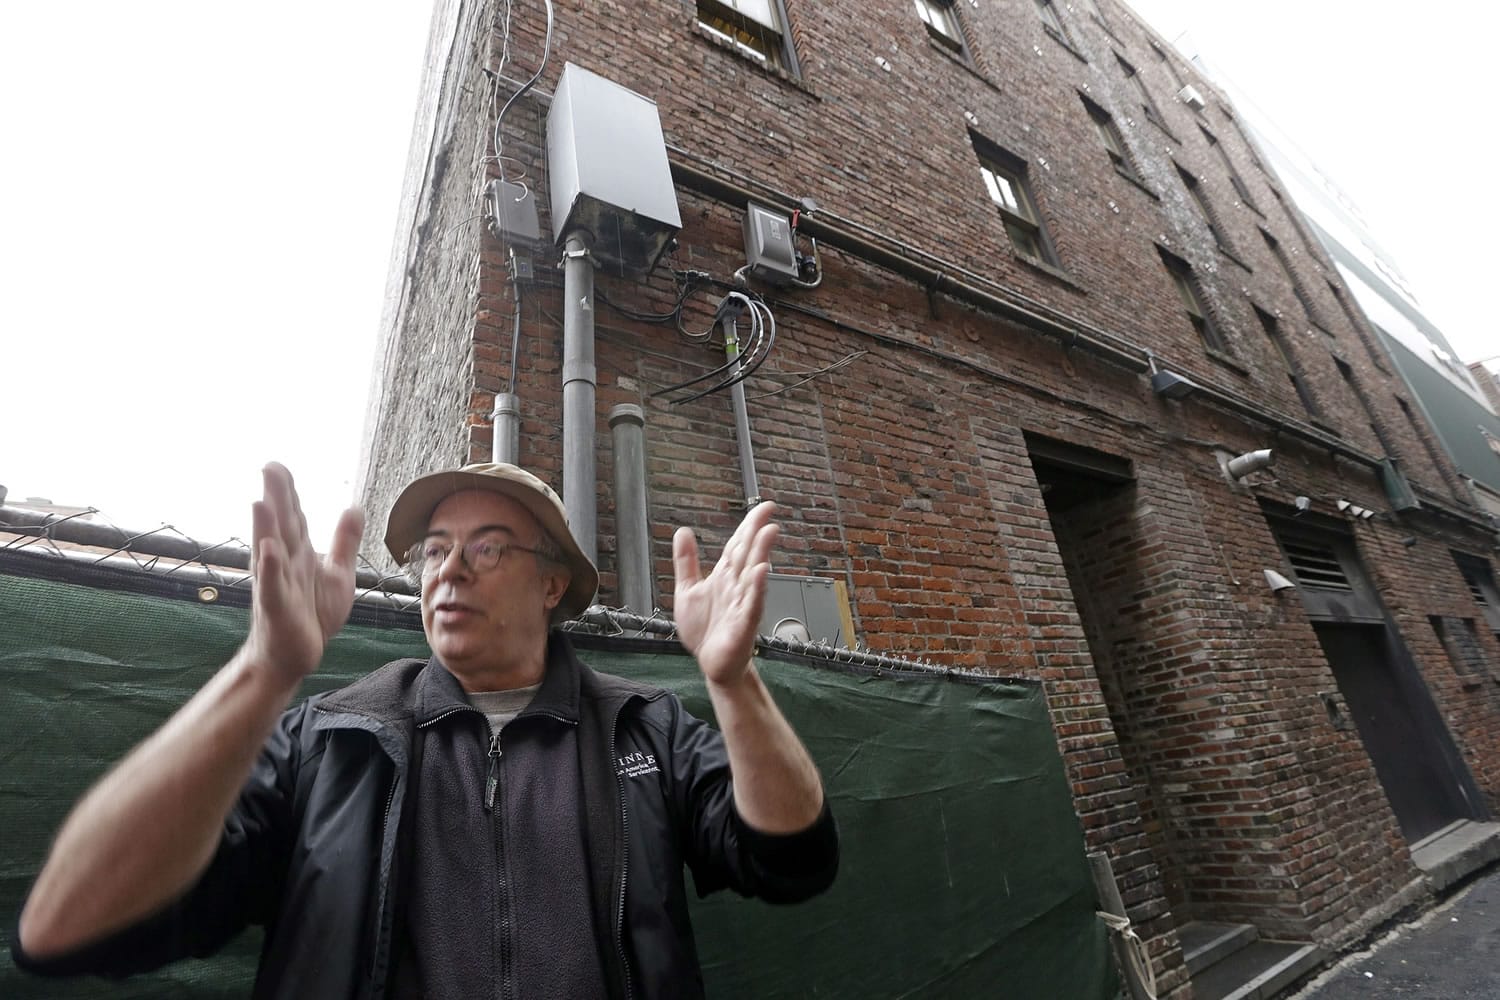 OK Hotel tenant Cyrus Charters talks about how he thinks the building behind him is settling on its southeast corner in Seattle's Pioneer Square district, where the Alaskan Way Viaduct stands nearby.